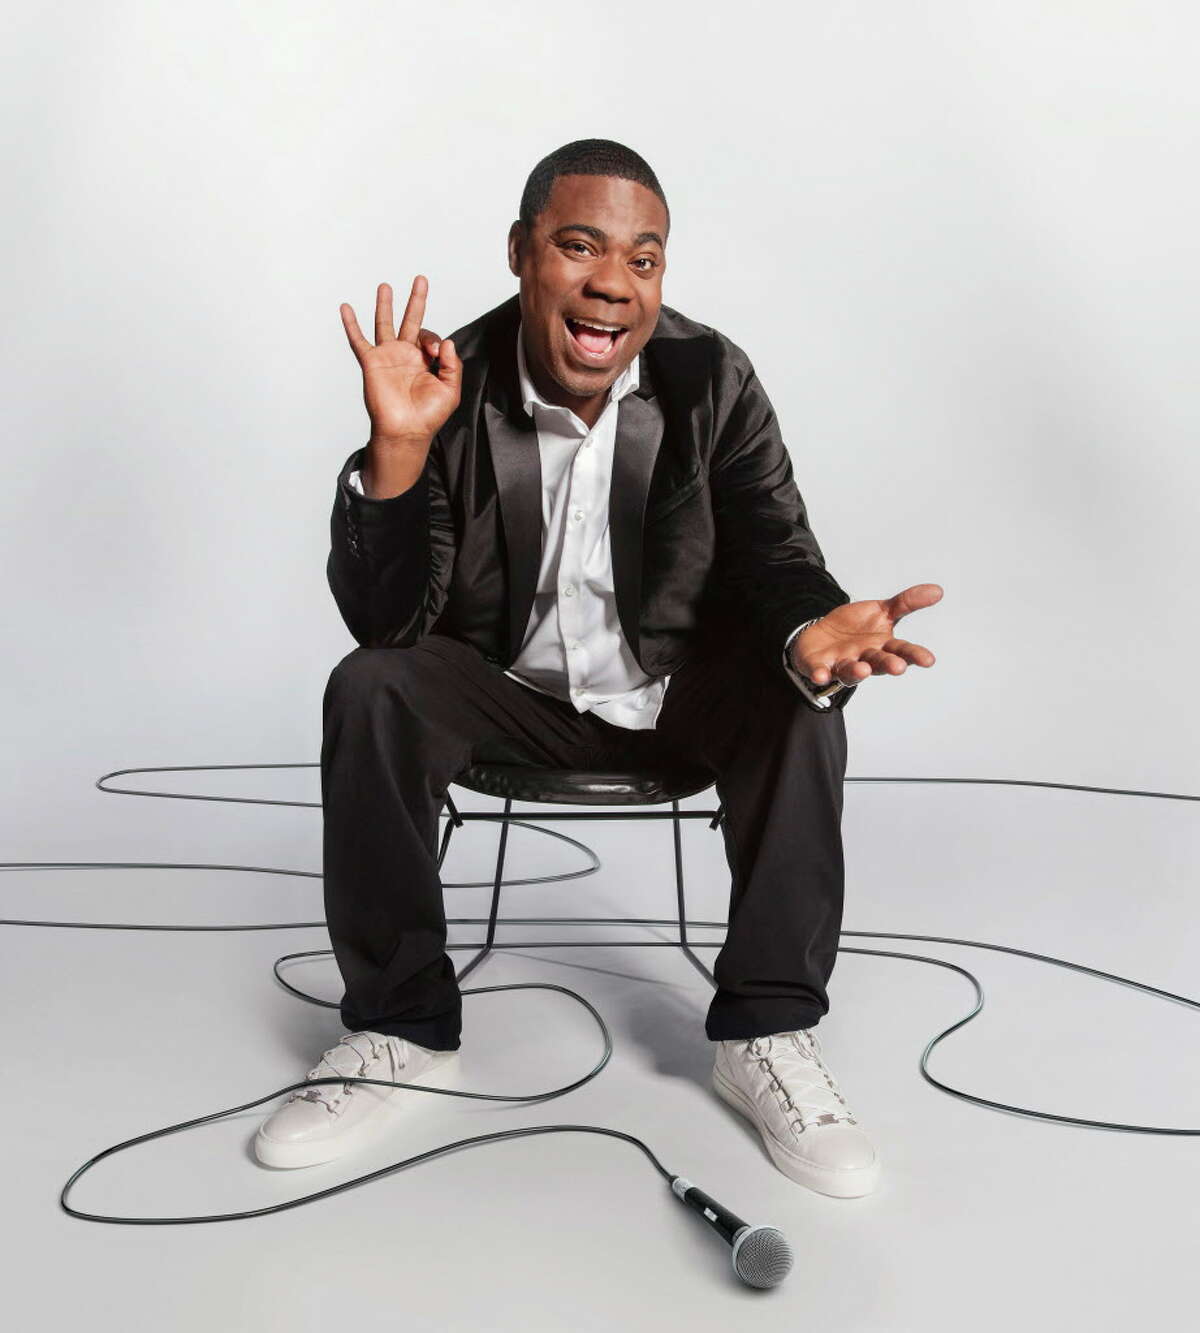 Comedian Tracy Morgan brings his “Picking Up the Pieces” tour to Foxwoods Grand Theater on Saturday, March 19.